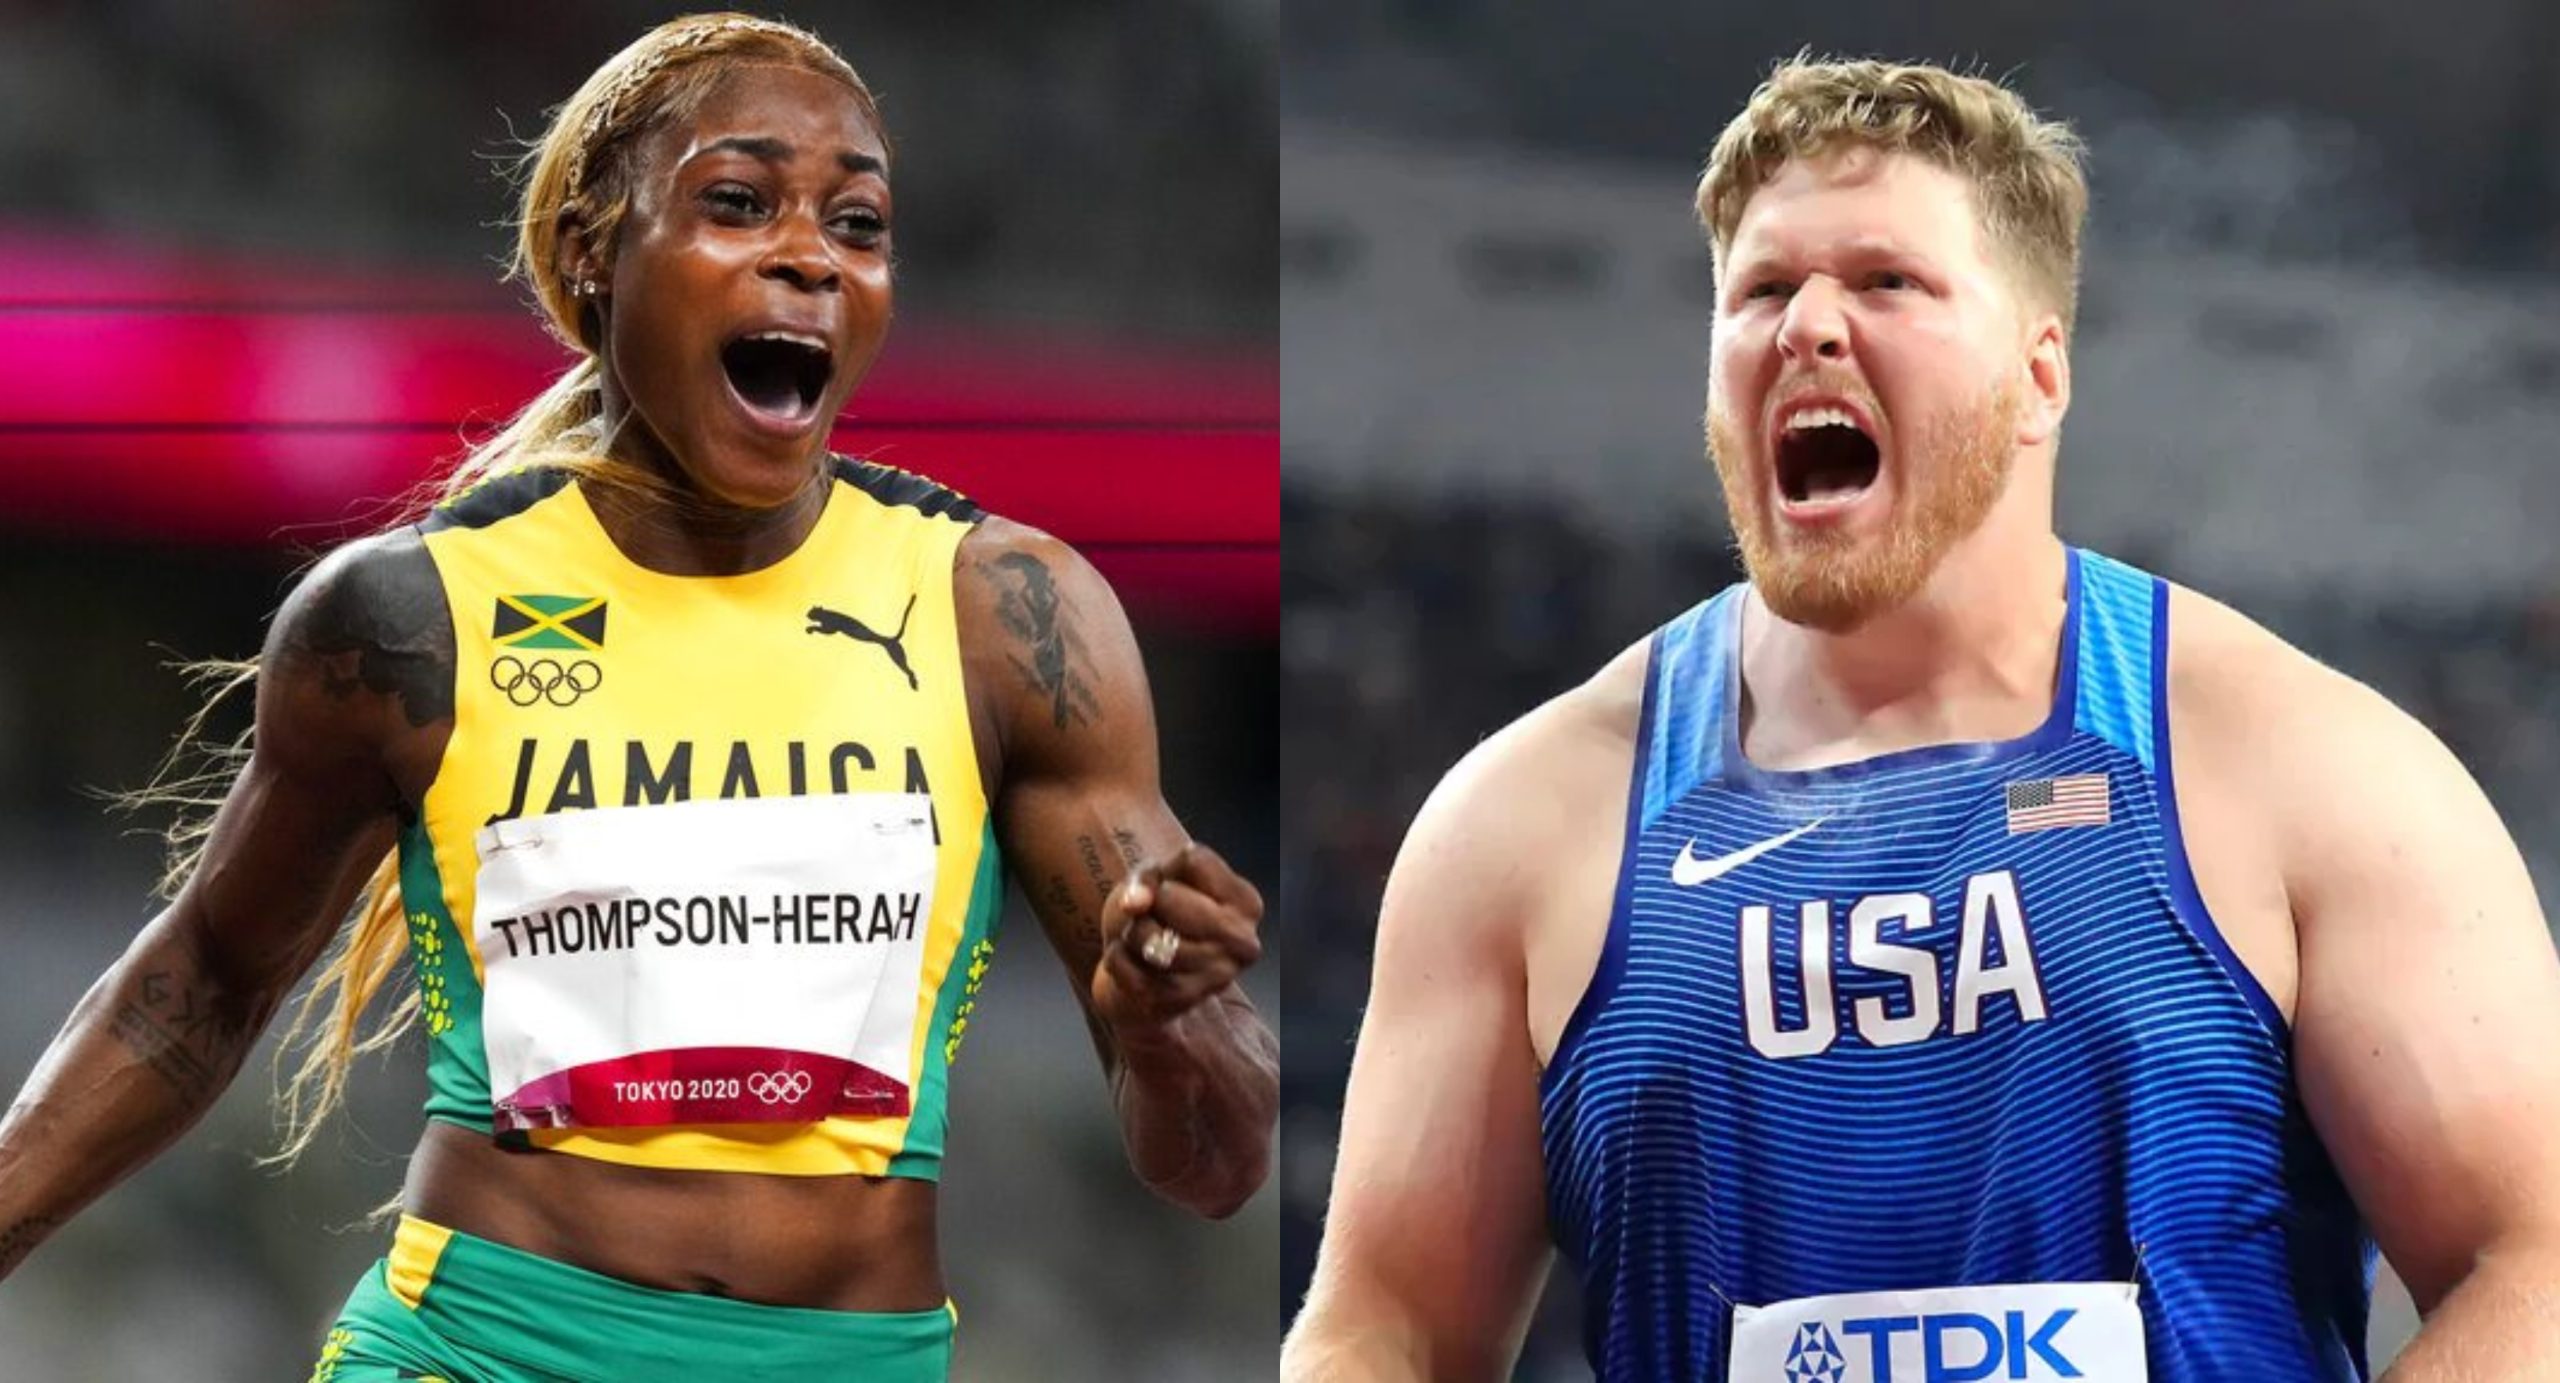 Elaine Thompson-Herah and Ryan Crouser are NACAC Athletes of the Year